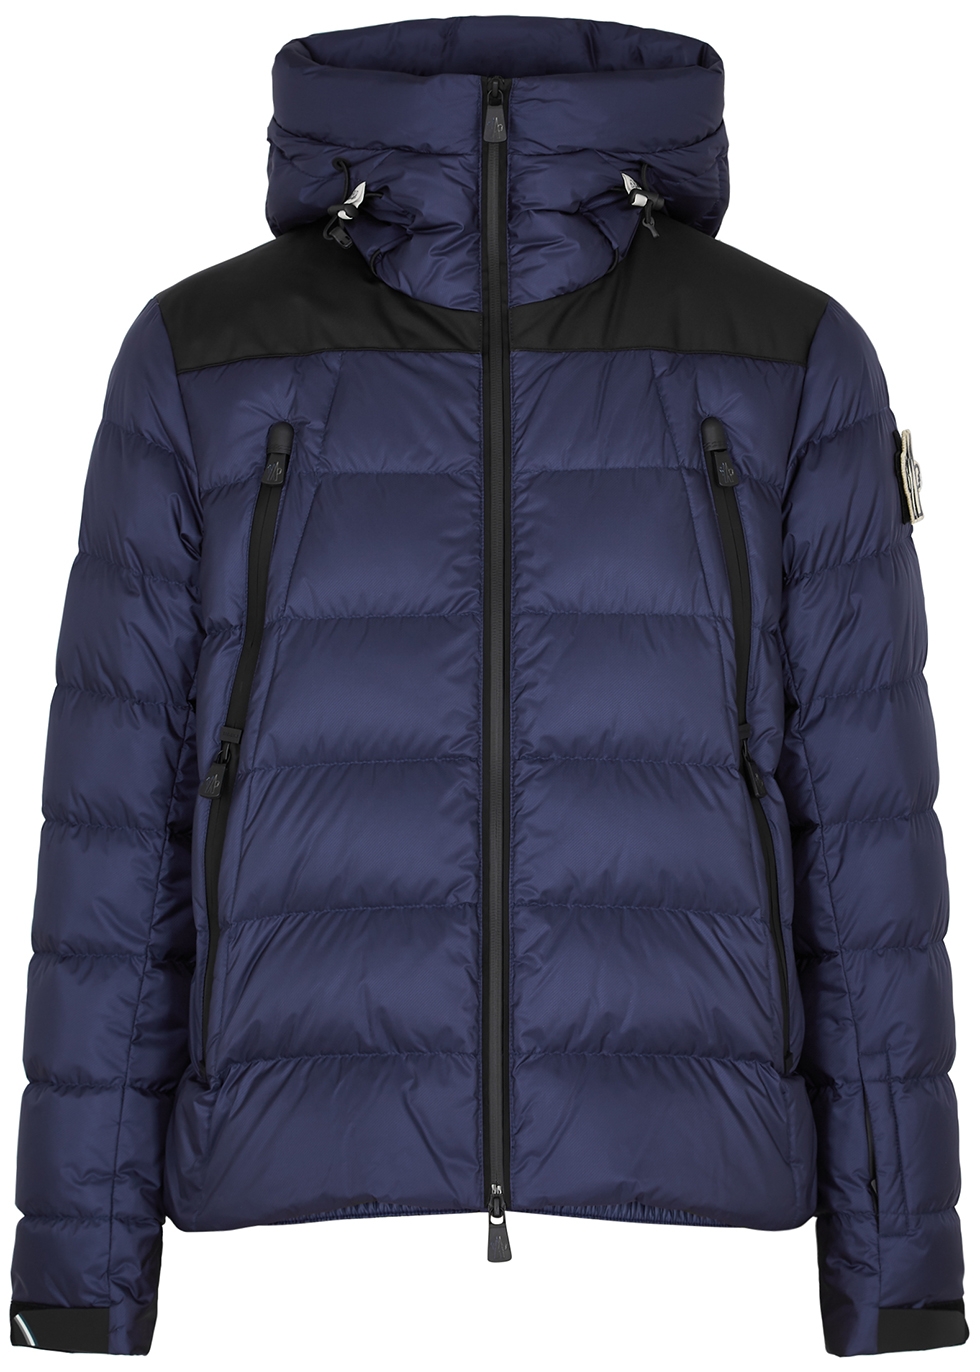 Moncler Grenoble Camorac quilted shell jacket - Harvey Nichols